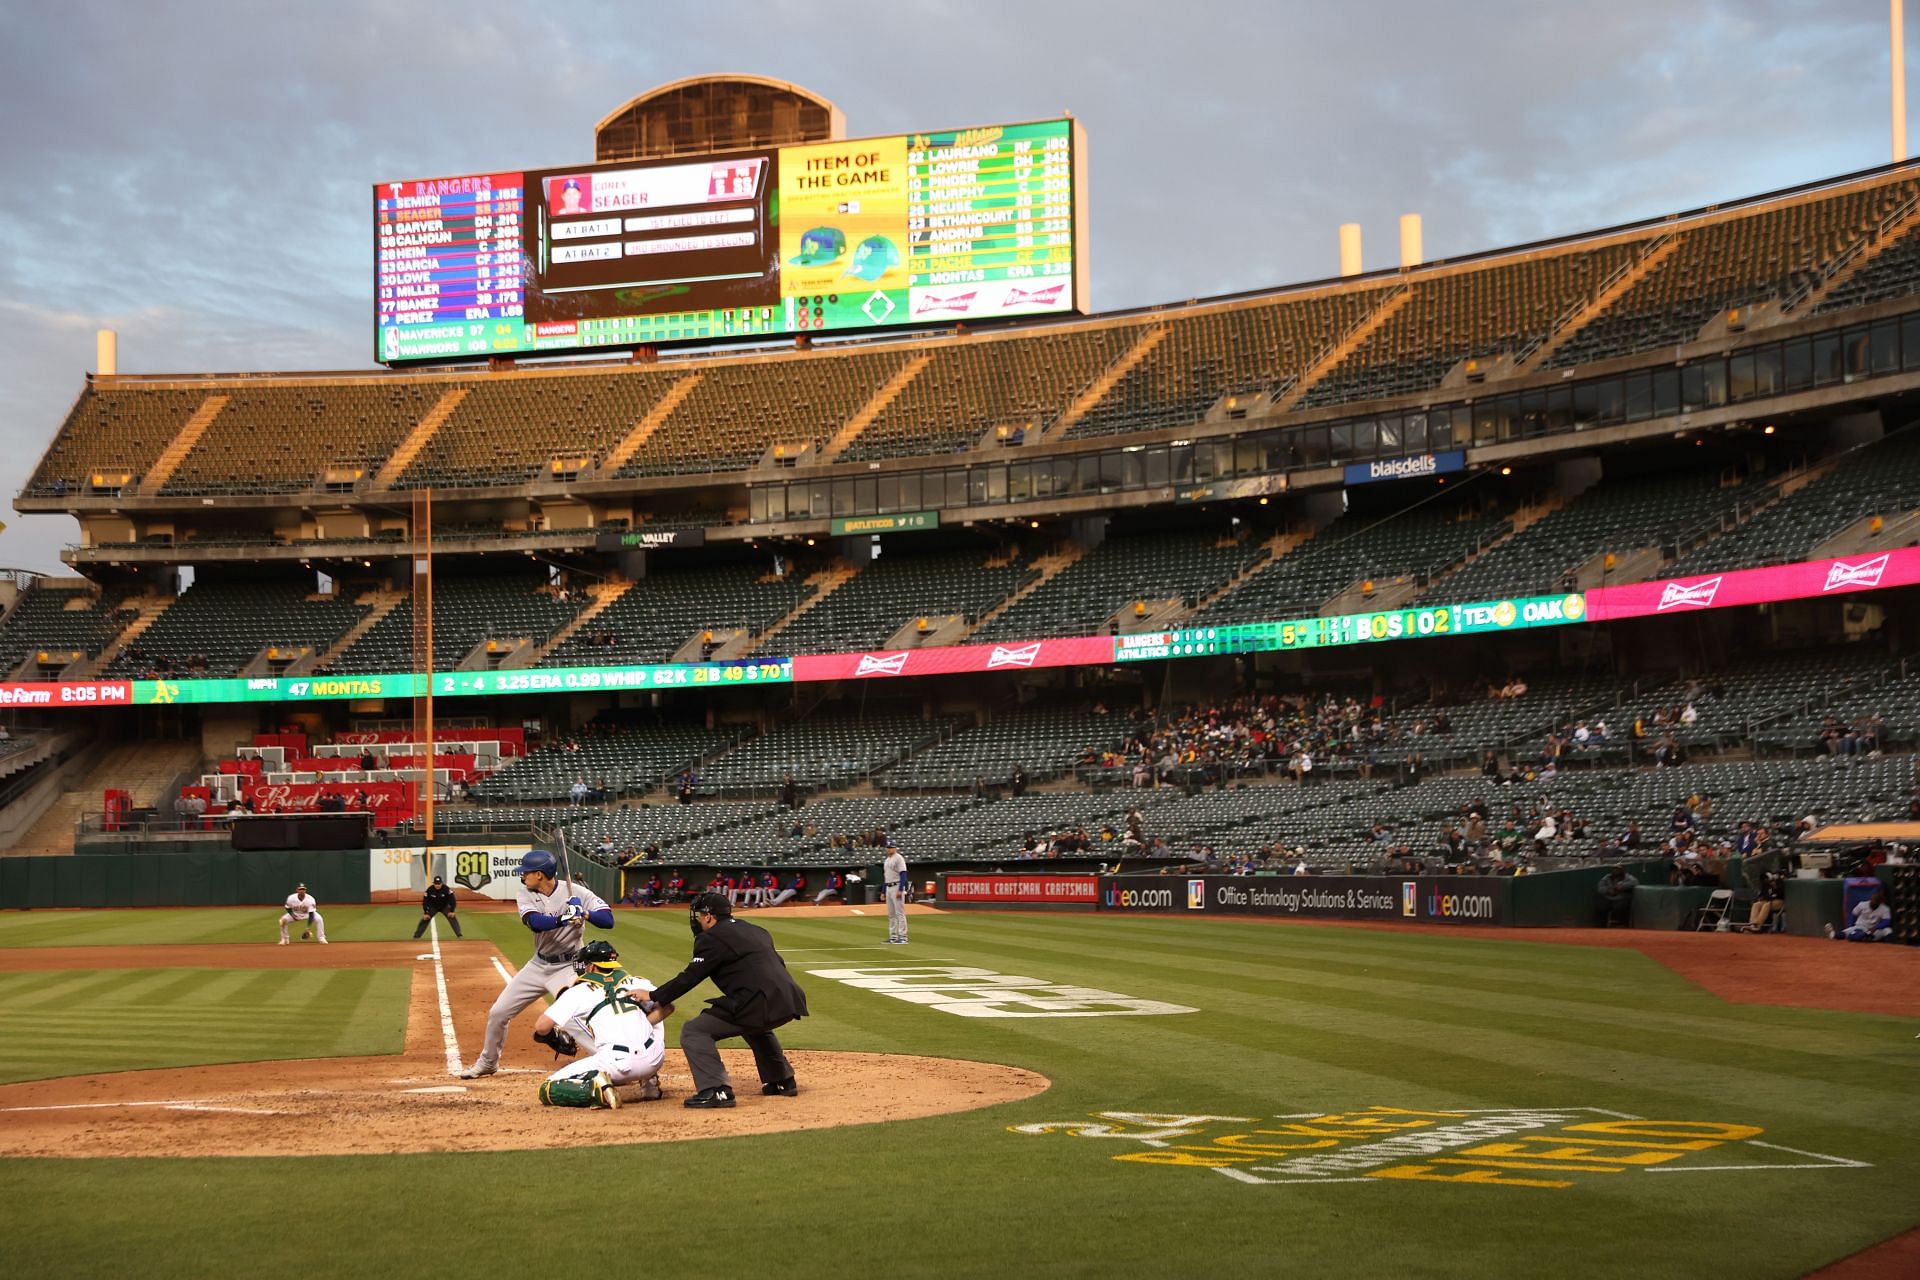 Oakland police investigating A's fans over alleged sex act